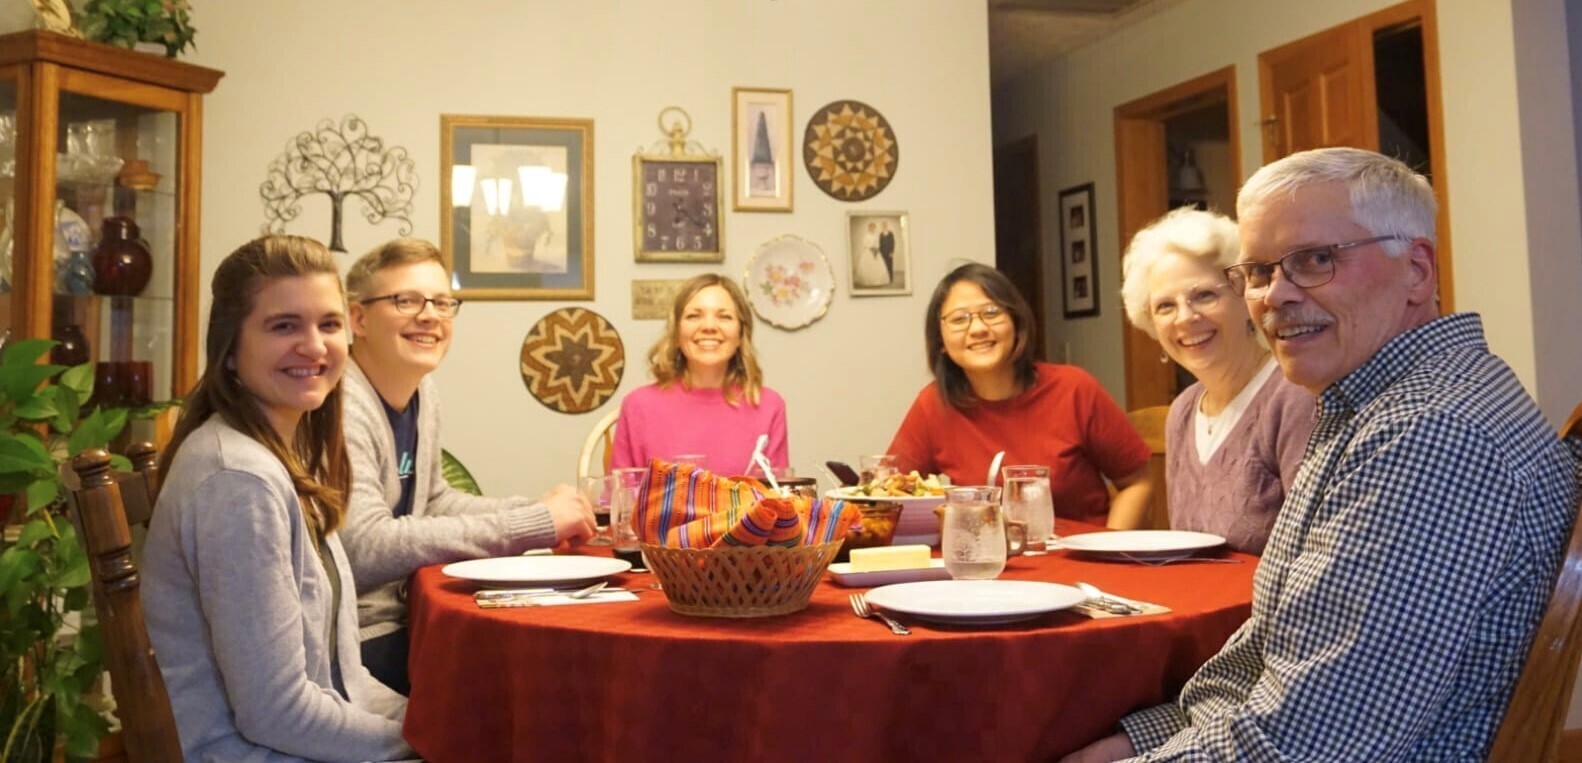 A group of six people sit around a dining room table. They are all smiling at the camera.